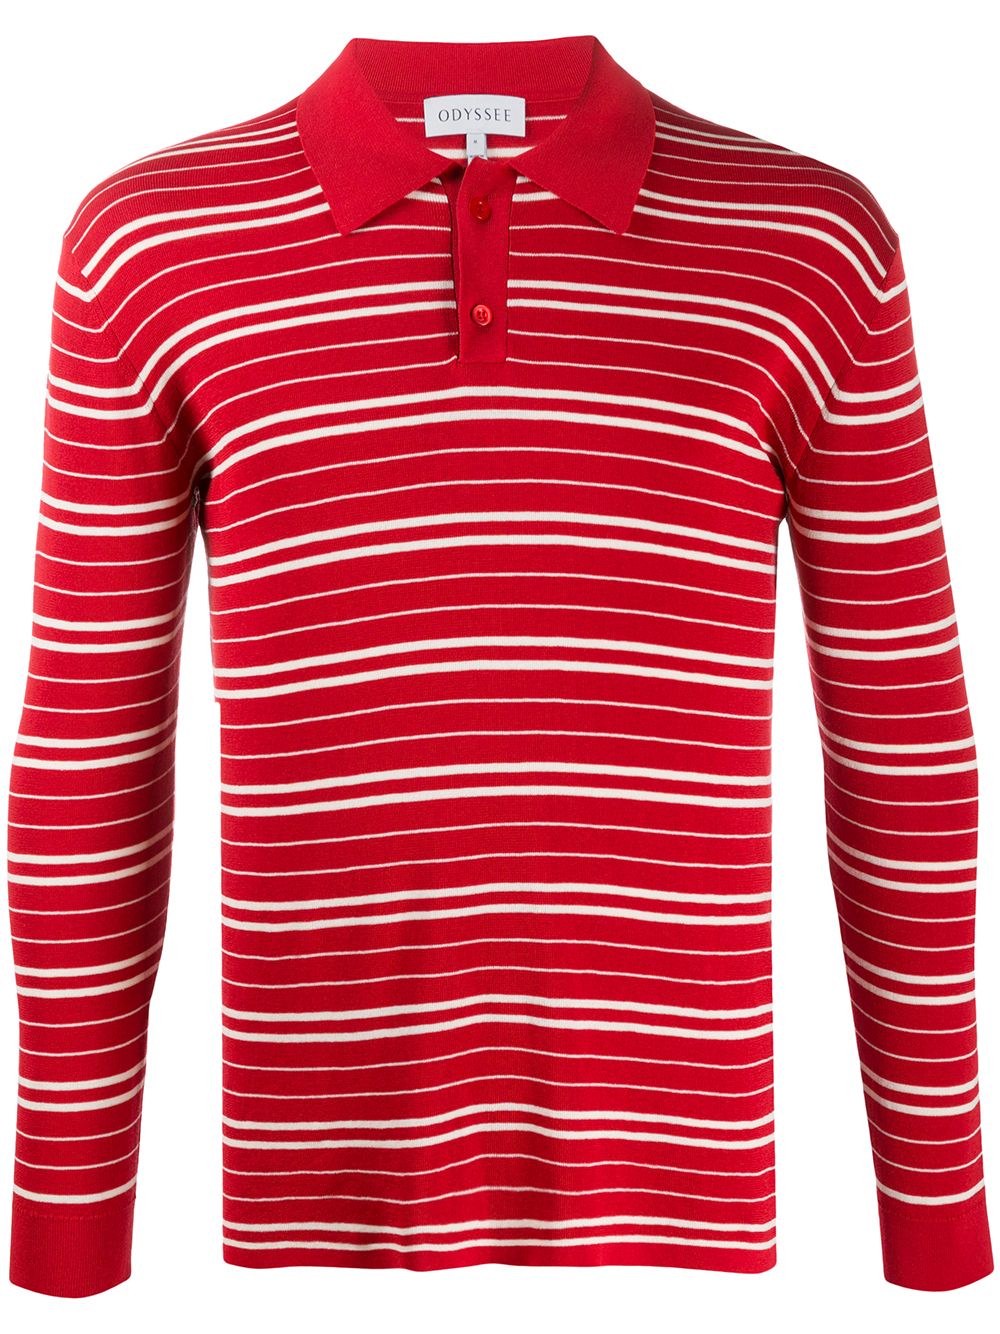 Odyssee Meadow Striped Jumper In Red